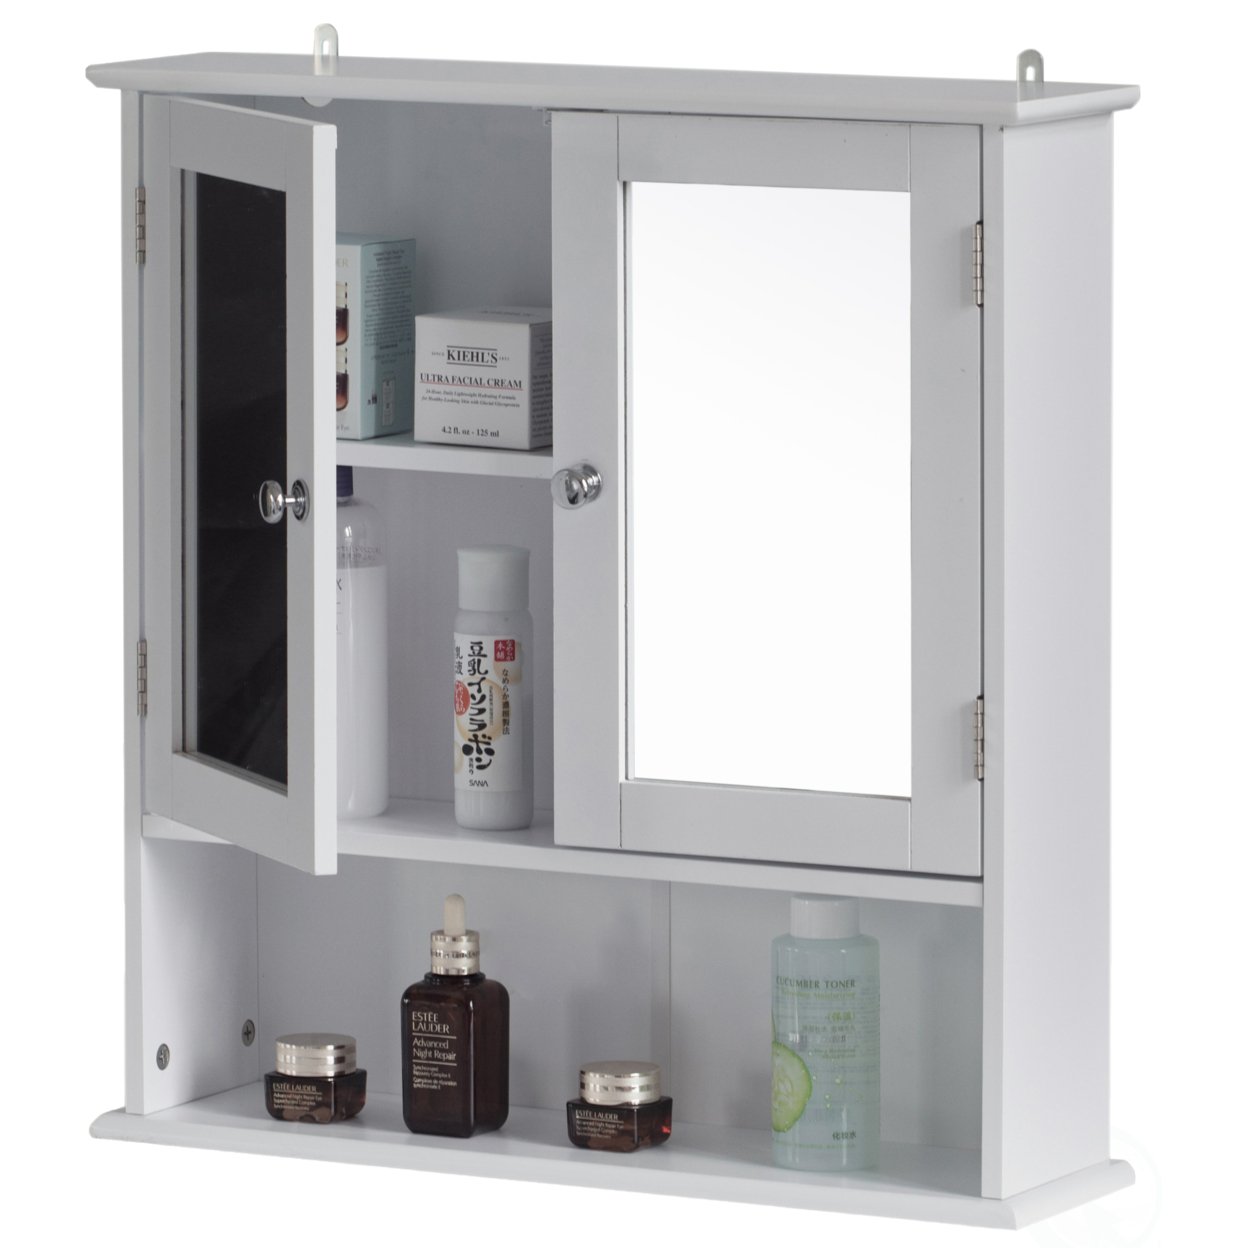 Mirror Wall Mounted Cabinet For The Bathroom And Vanity With Adjustable Shelves - Gray